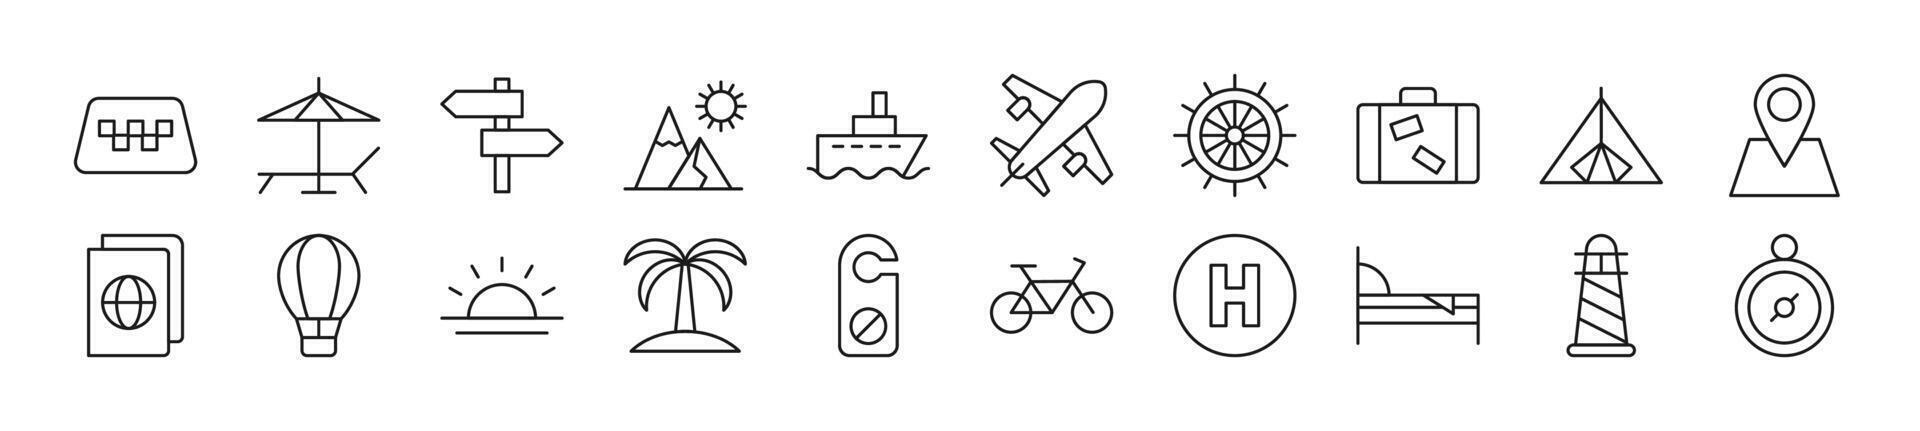 Travel line icons collection. Editable stroke. Simple linear illustration for web sites, newspapers, articles book vector